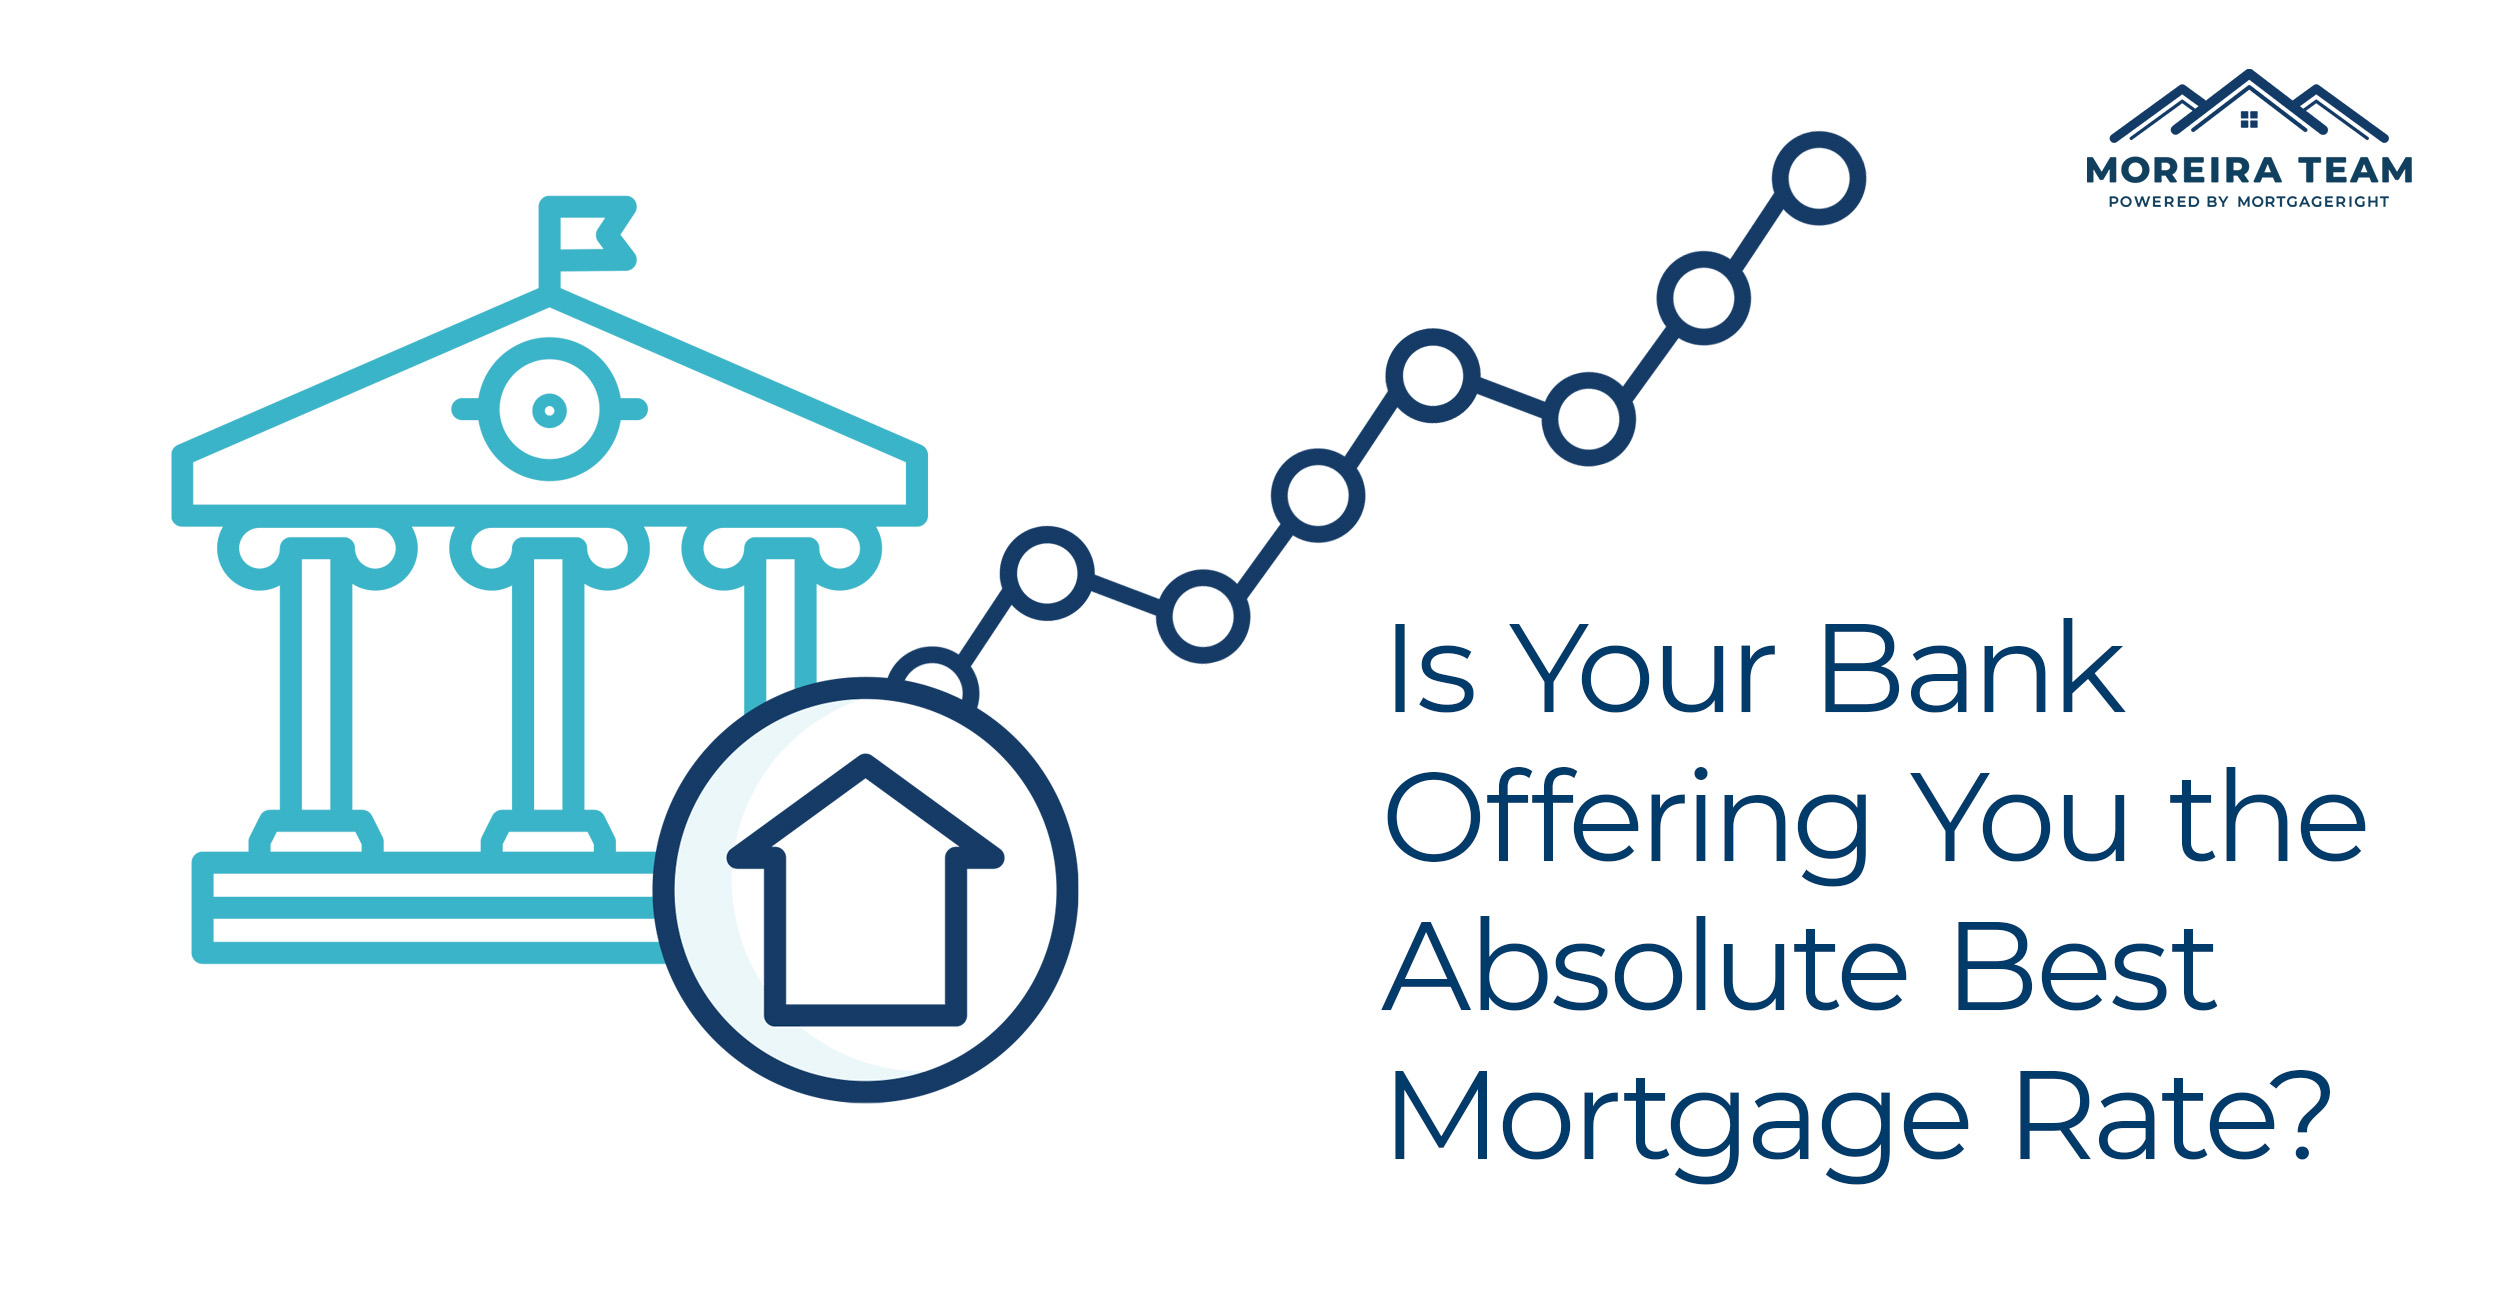 Is Your Bank Offering You The Absolute Best Mortgage Rate? Probably Not!